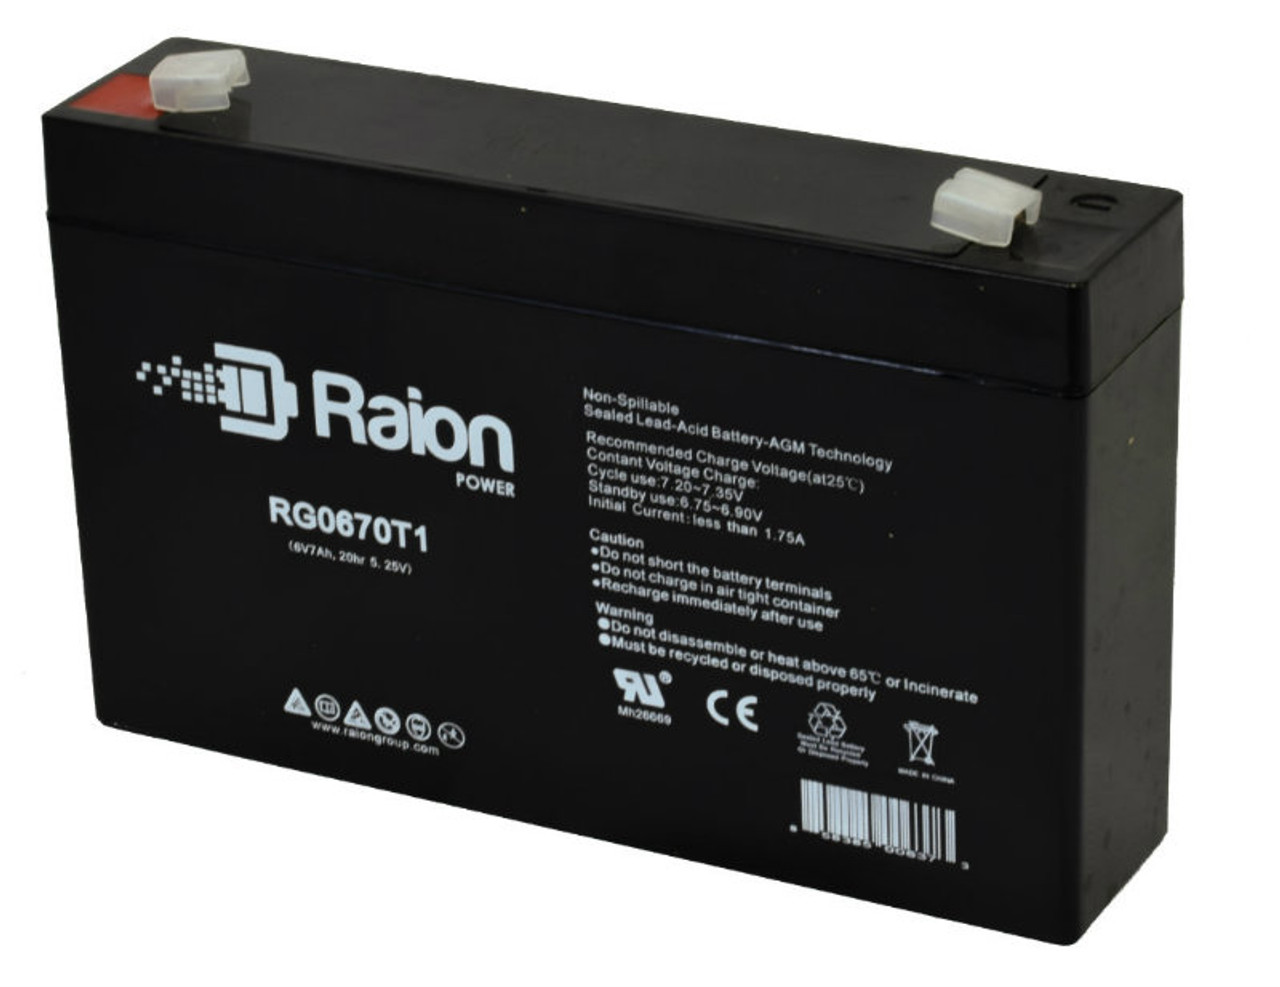 Raion Power RG0670T1 6V 7Ah Replacement Emergency Lighting Battery for Dual-Lite LM80